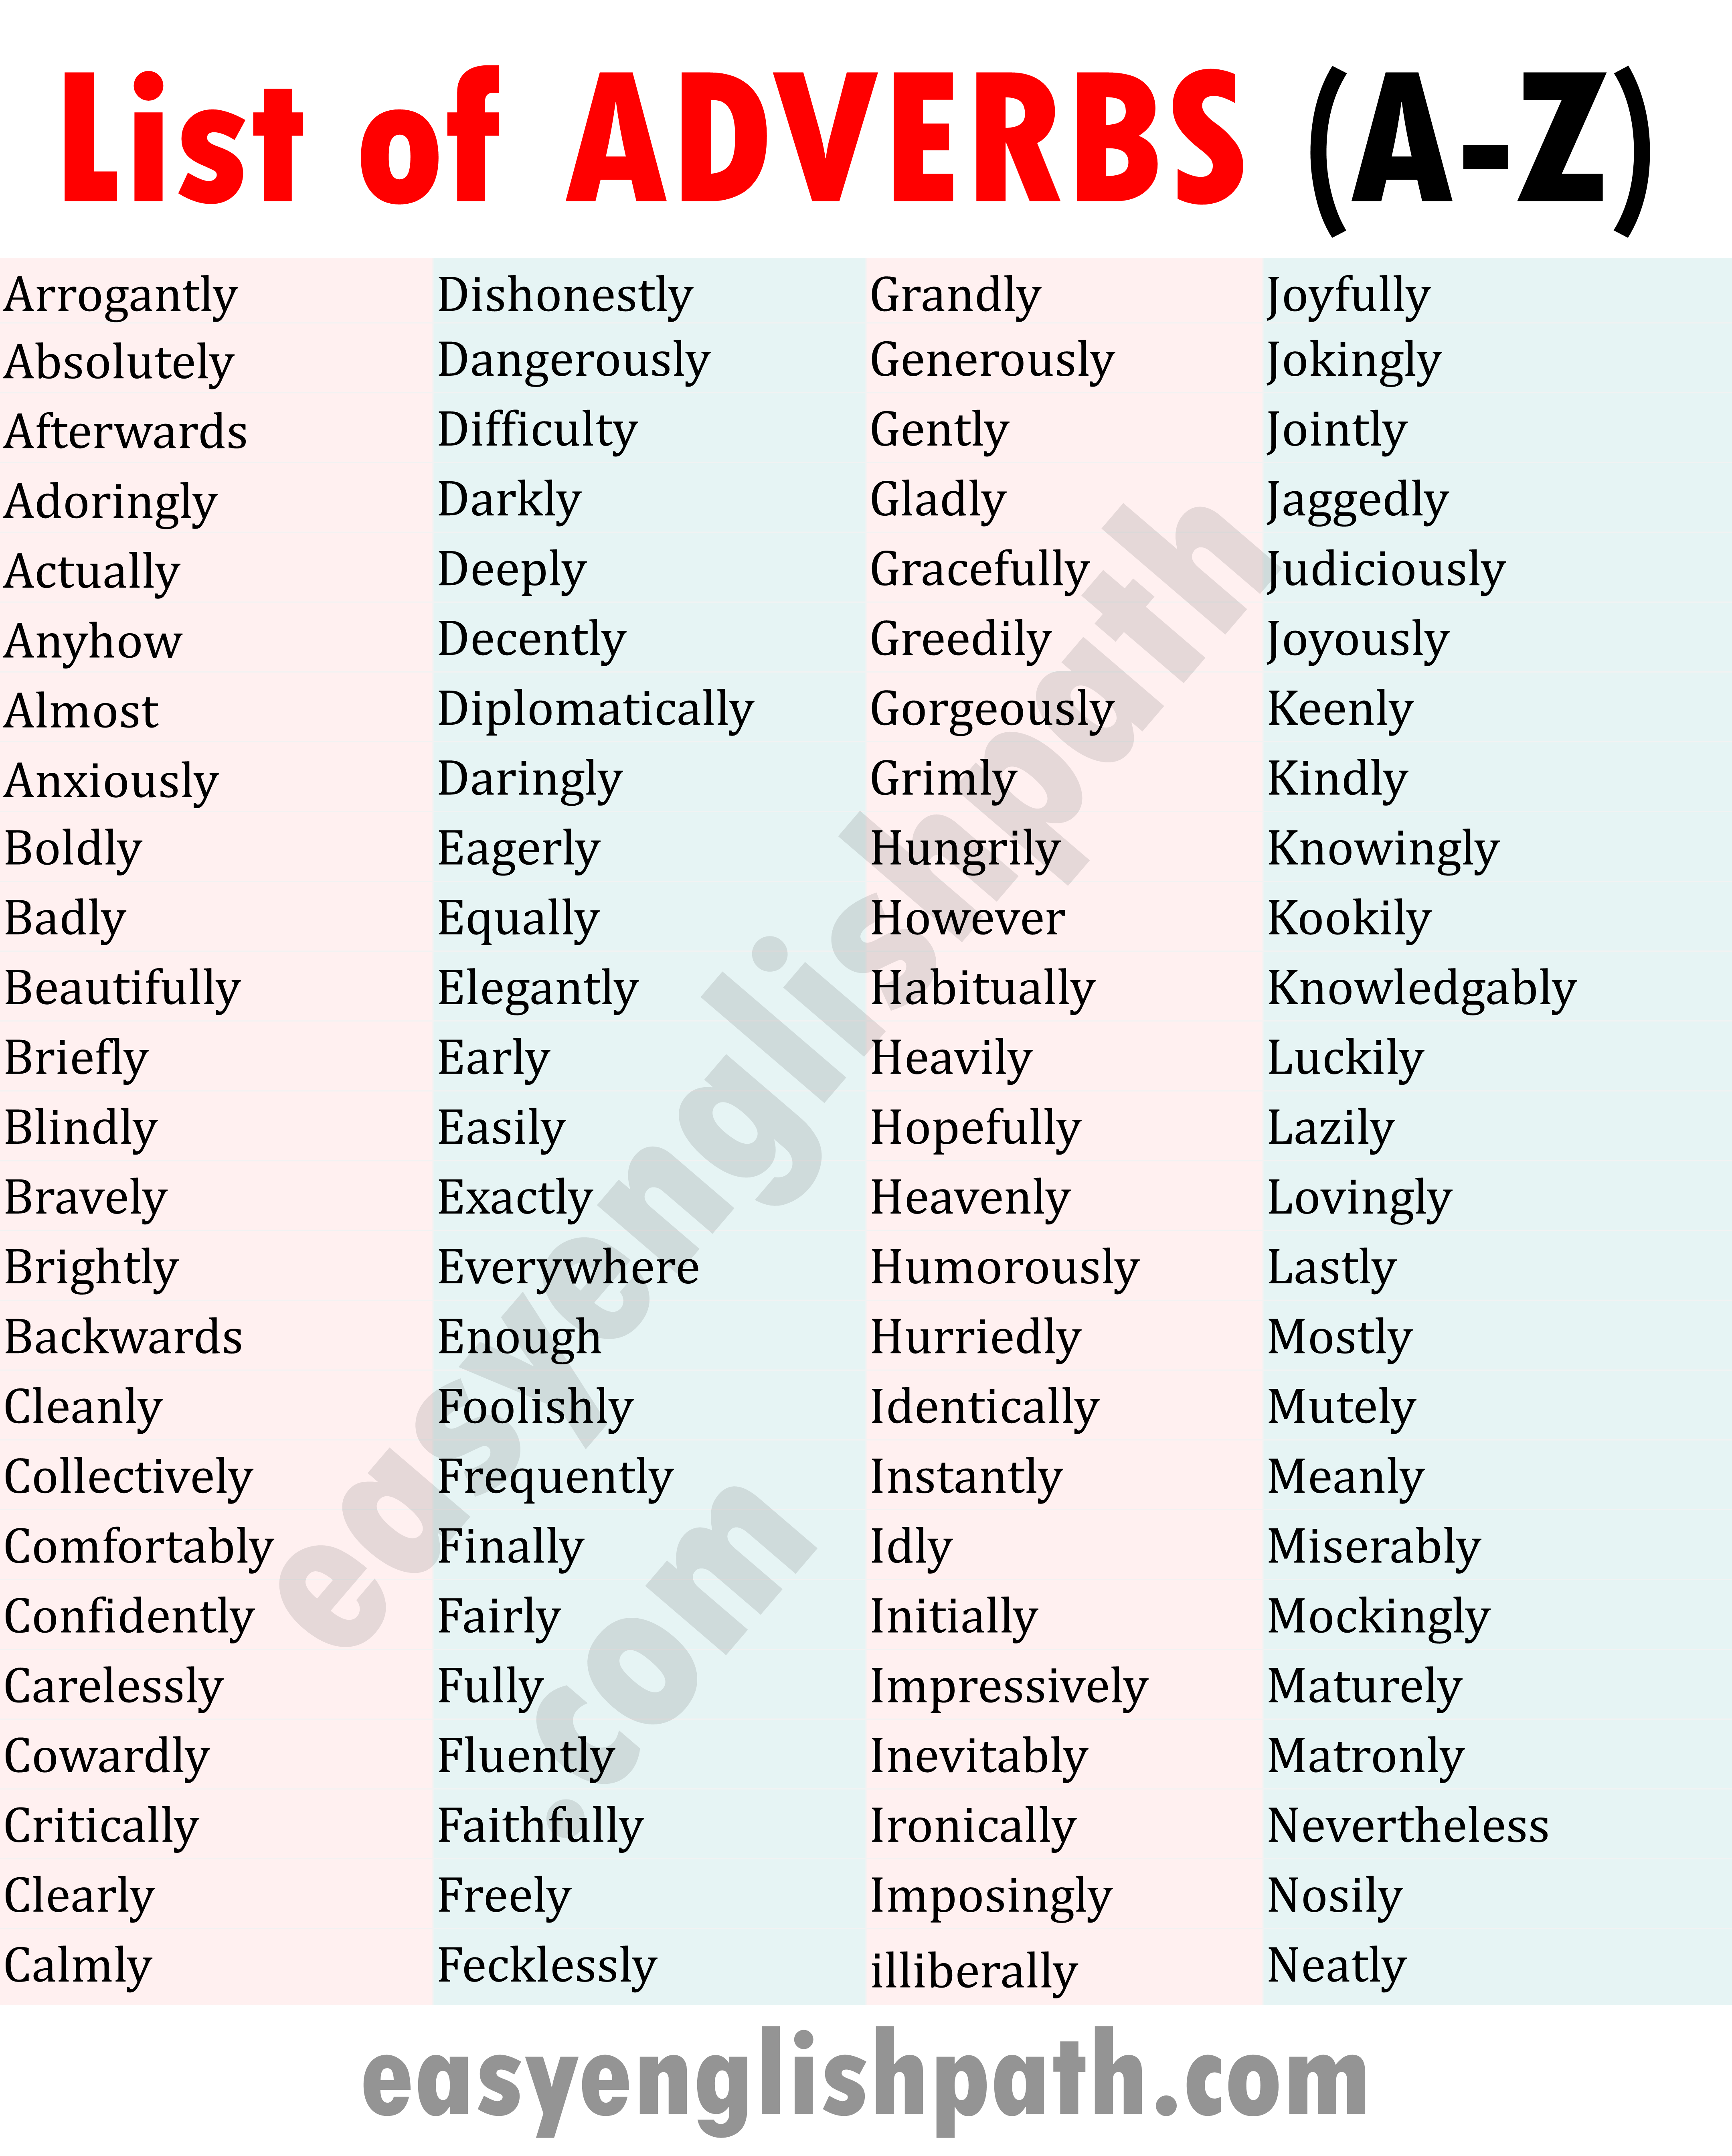 Adverbs List A to Z in English with Example Sentences